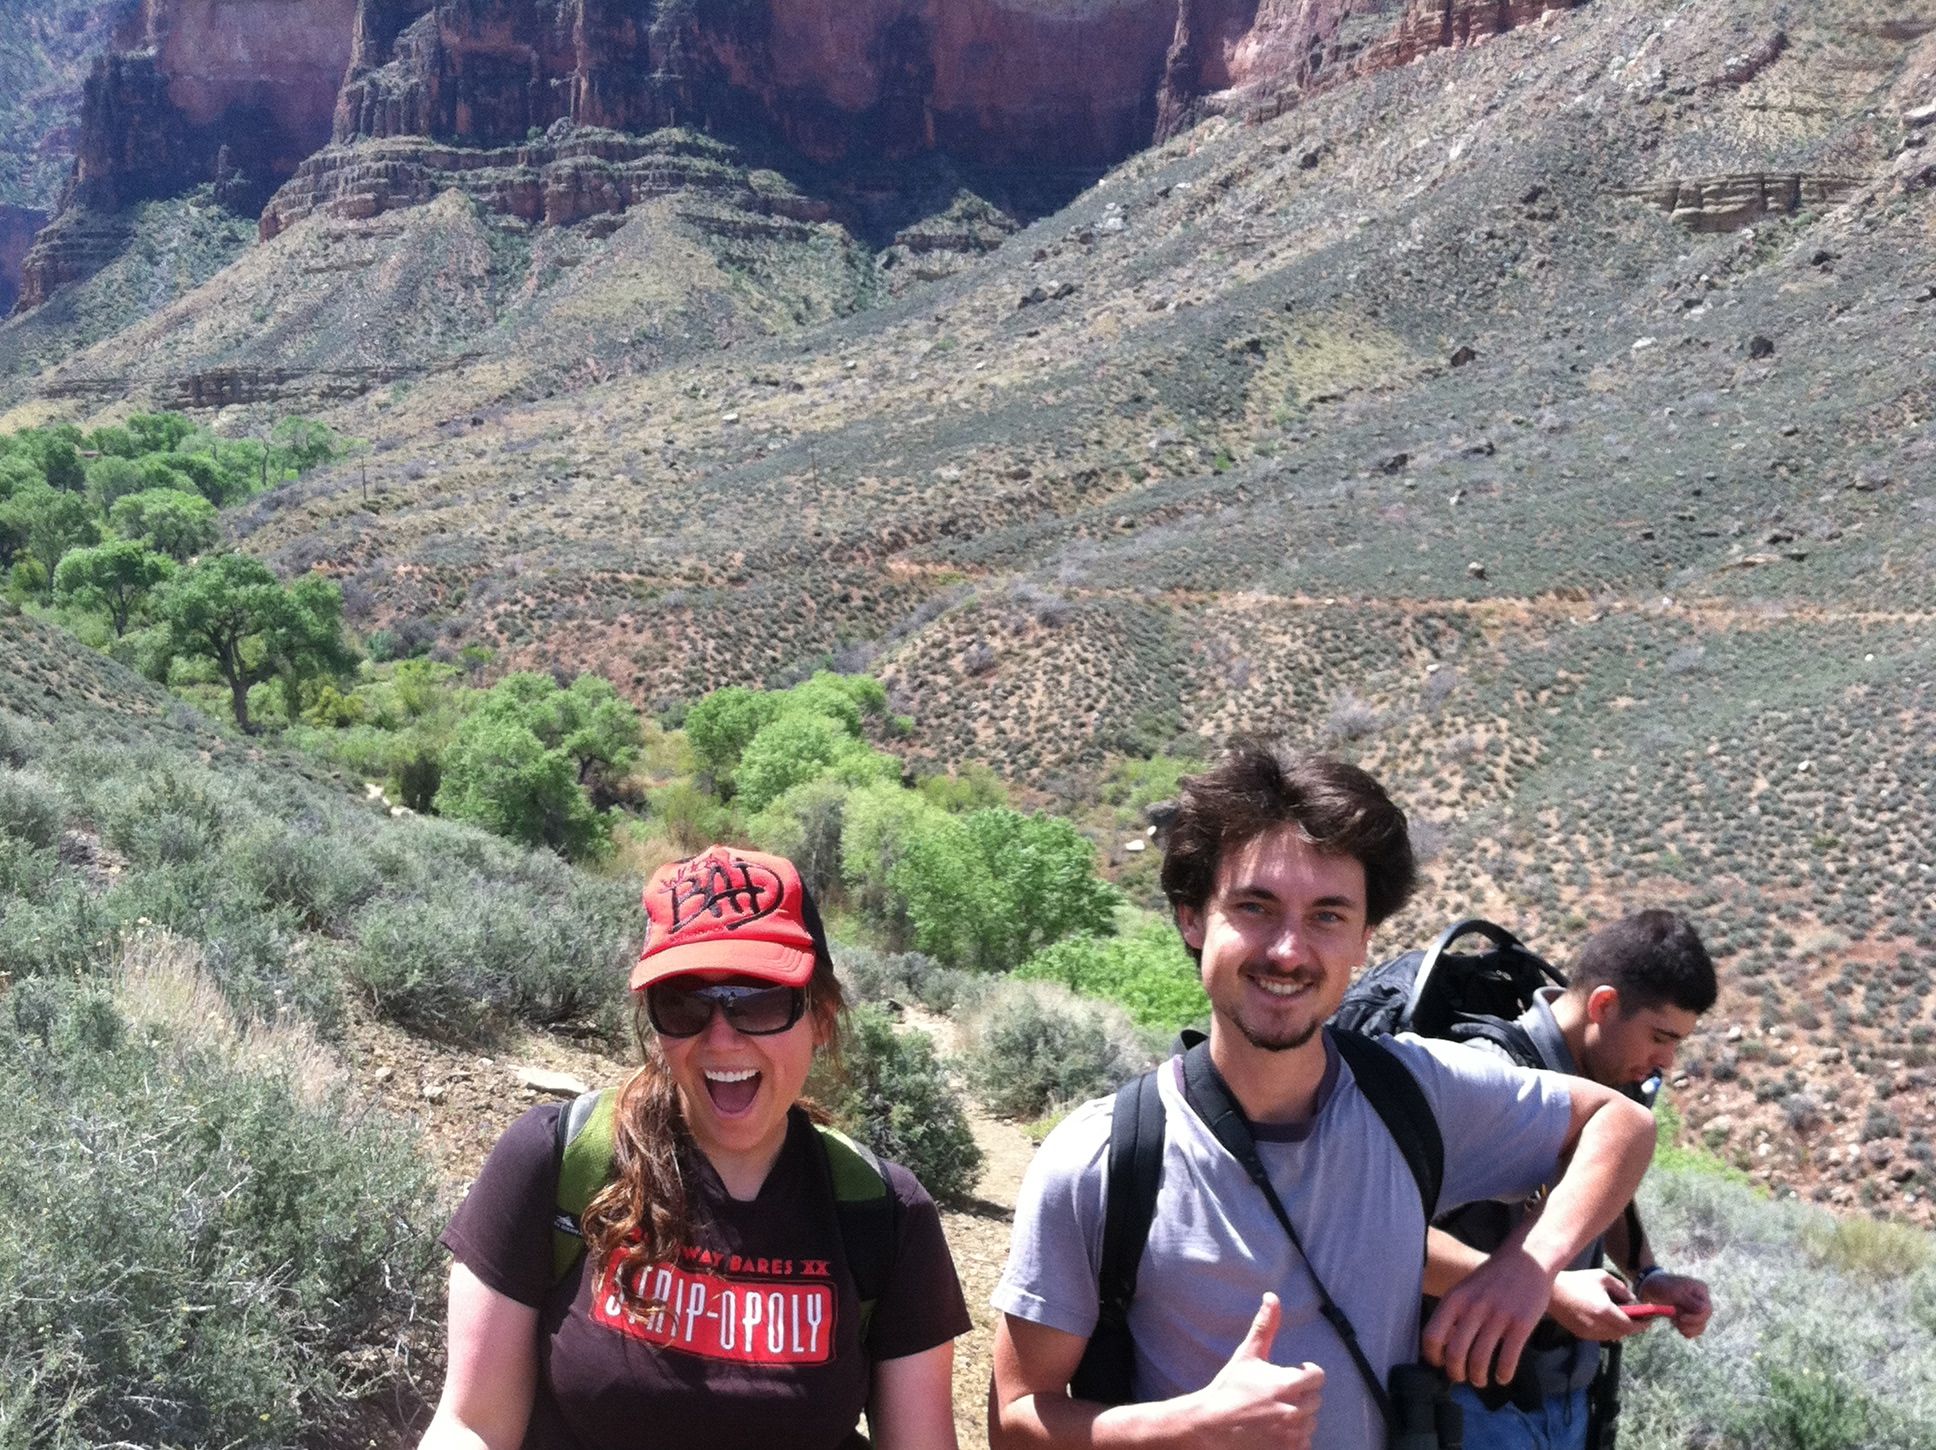 Aurora De Lucia and Jessie hiking on Bright Angel Trail in The Grand Canyon (Anthony in background)